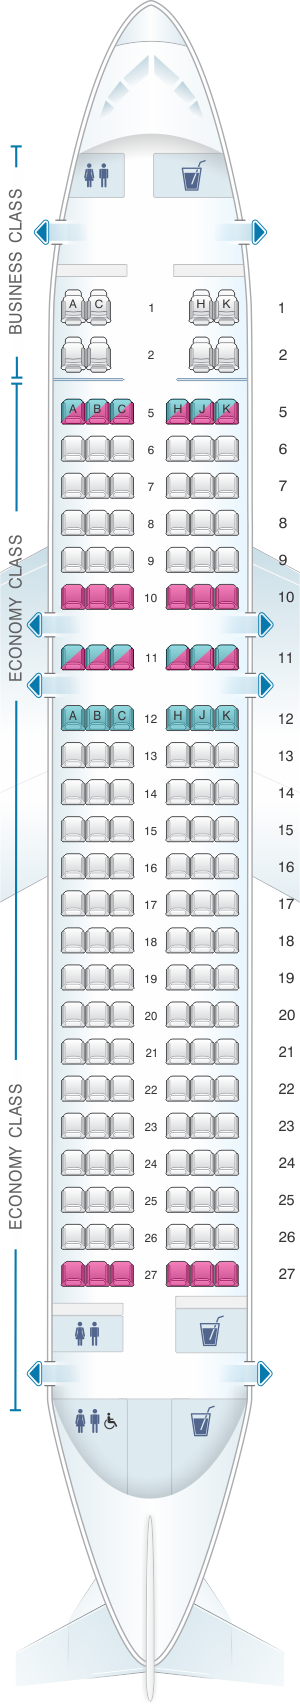 Seat map for ANA - All Nippon Airways Airbus A320 neo